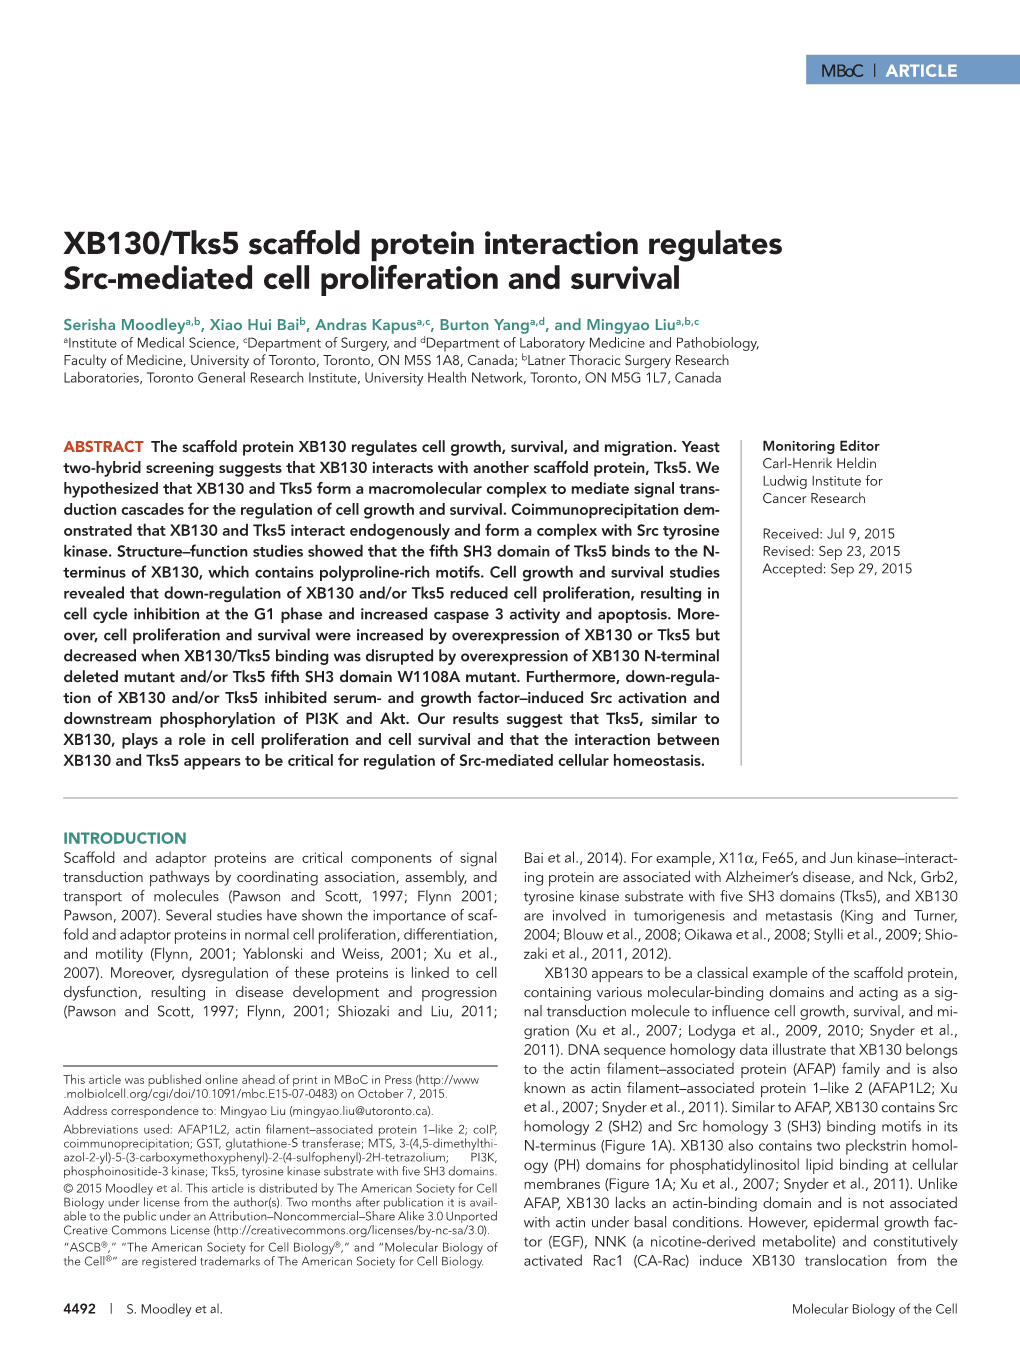 XB130/Tks5 Scaffold Protein Interaction Regulates Src-Mediated Cell Proliferation and Survival